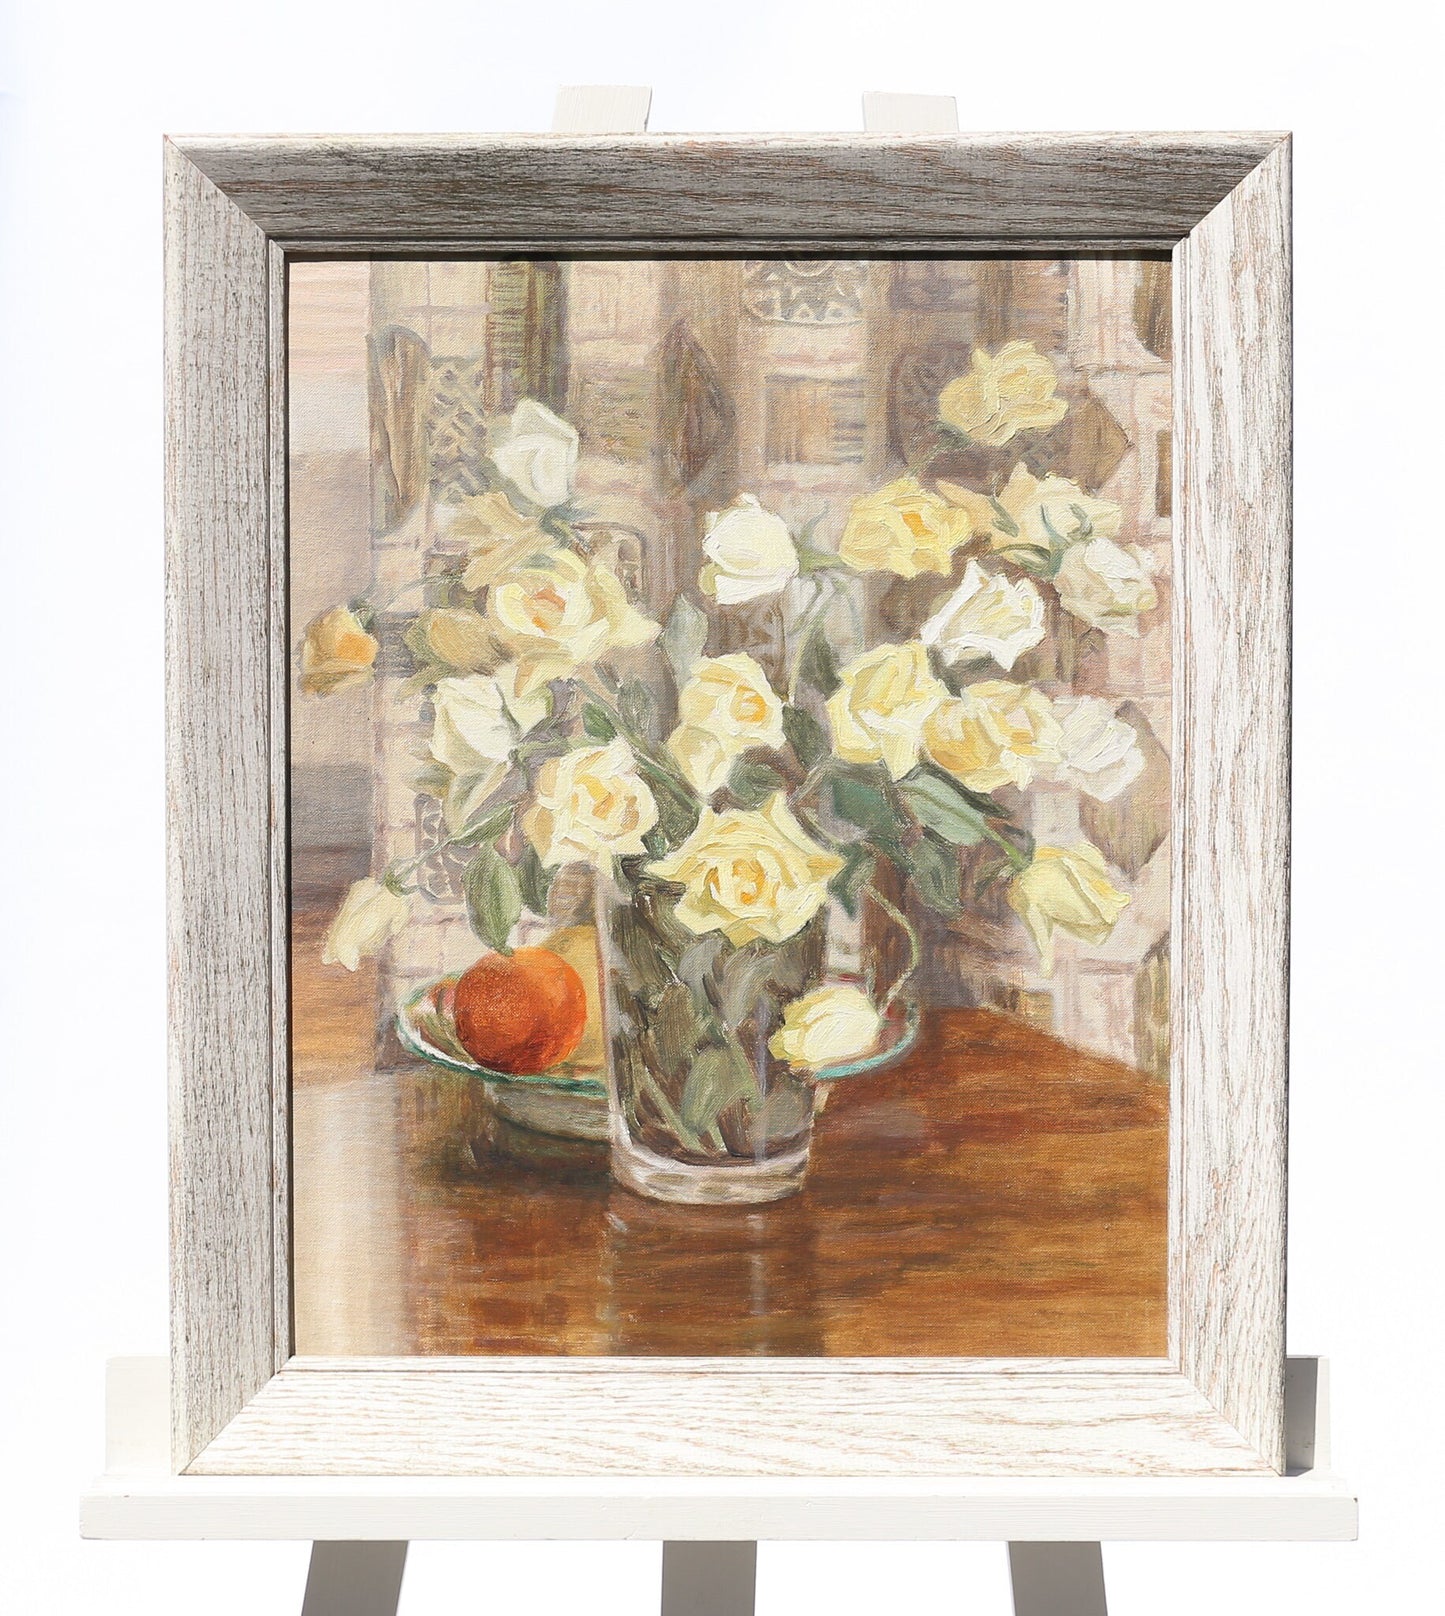 Painting Oil on Canvasboard "Pale Roses" Artist Signed Jule Melbardis 1950s Yellow Roses Modernist MCM Mid Century Modern Realist